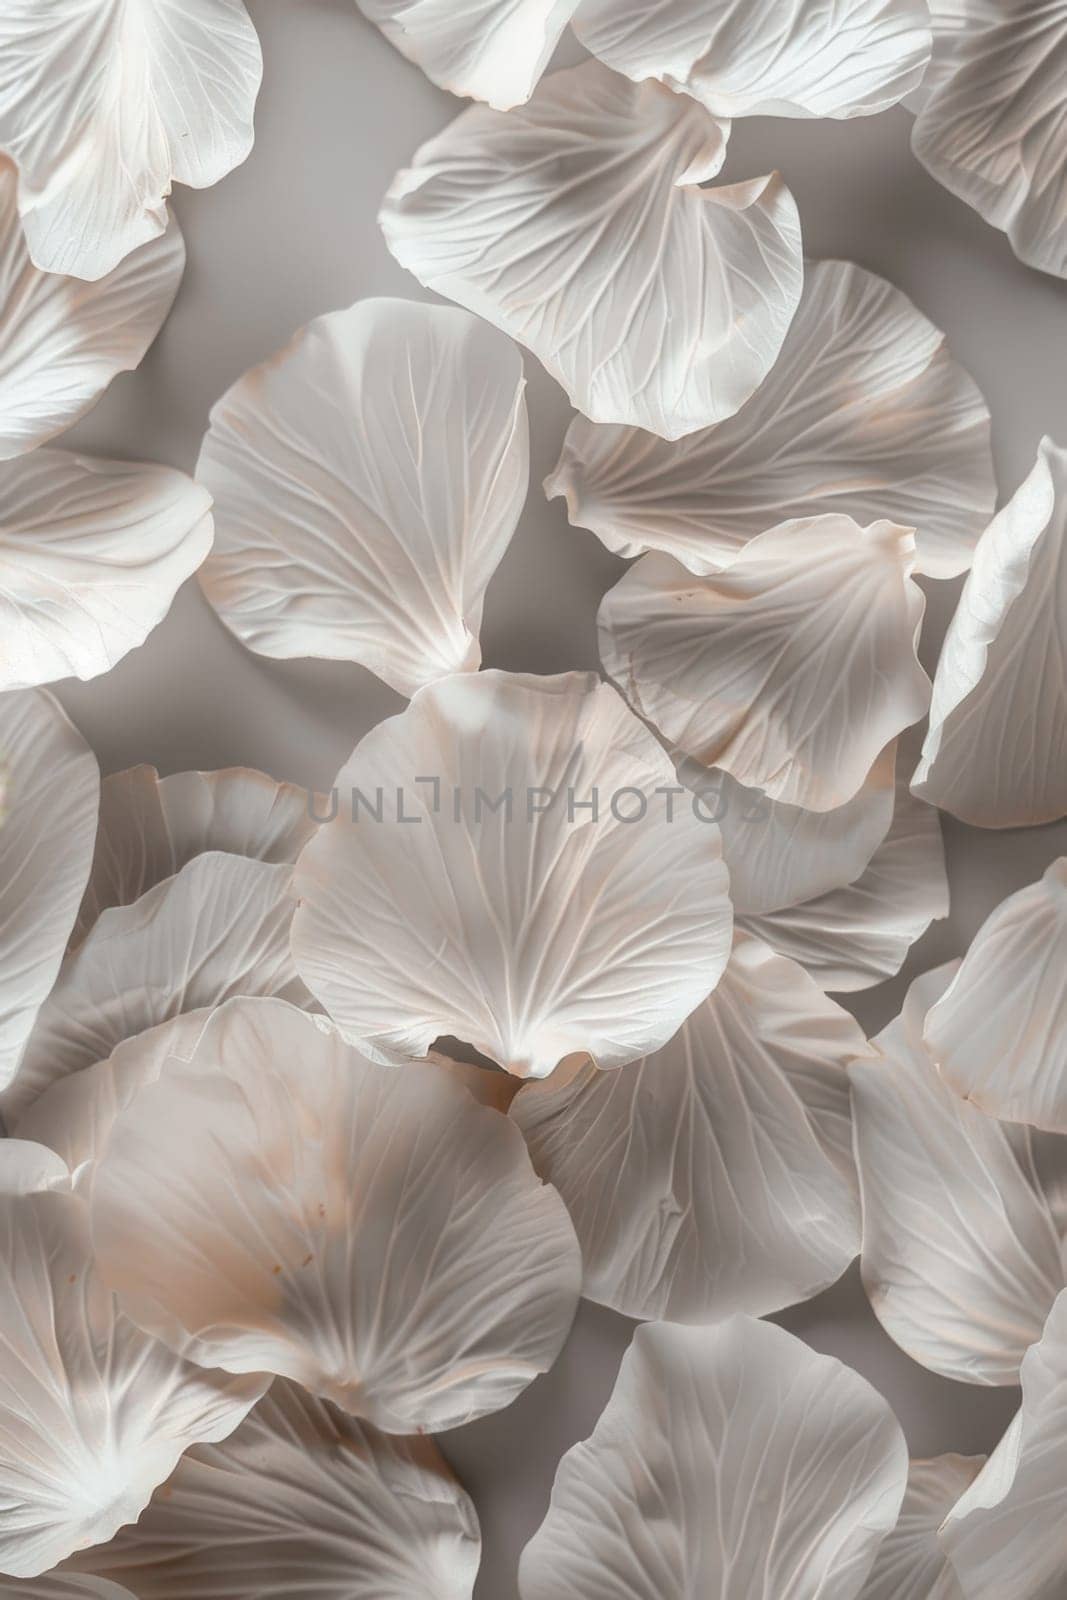 Abstract floral pattern of petals. Delicate background colors of flower petals by Lobachad